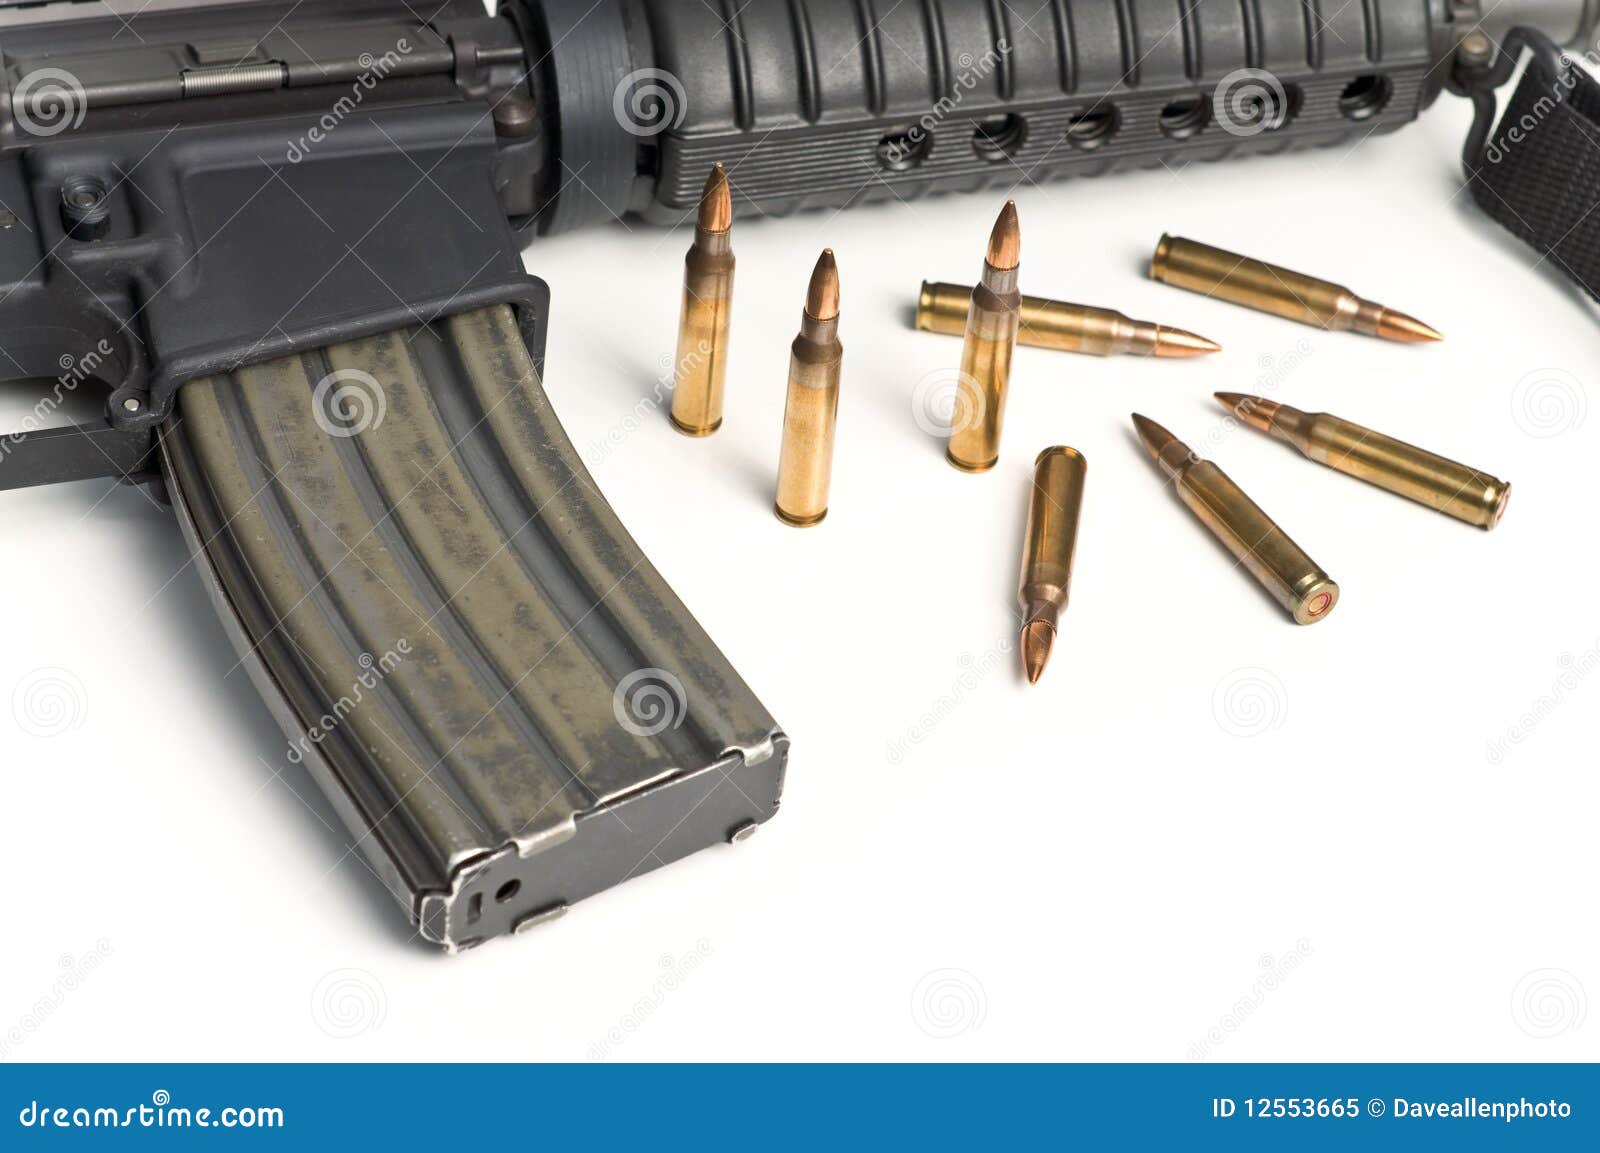 223 bullets with m16 style military assault rifle